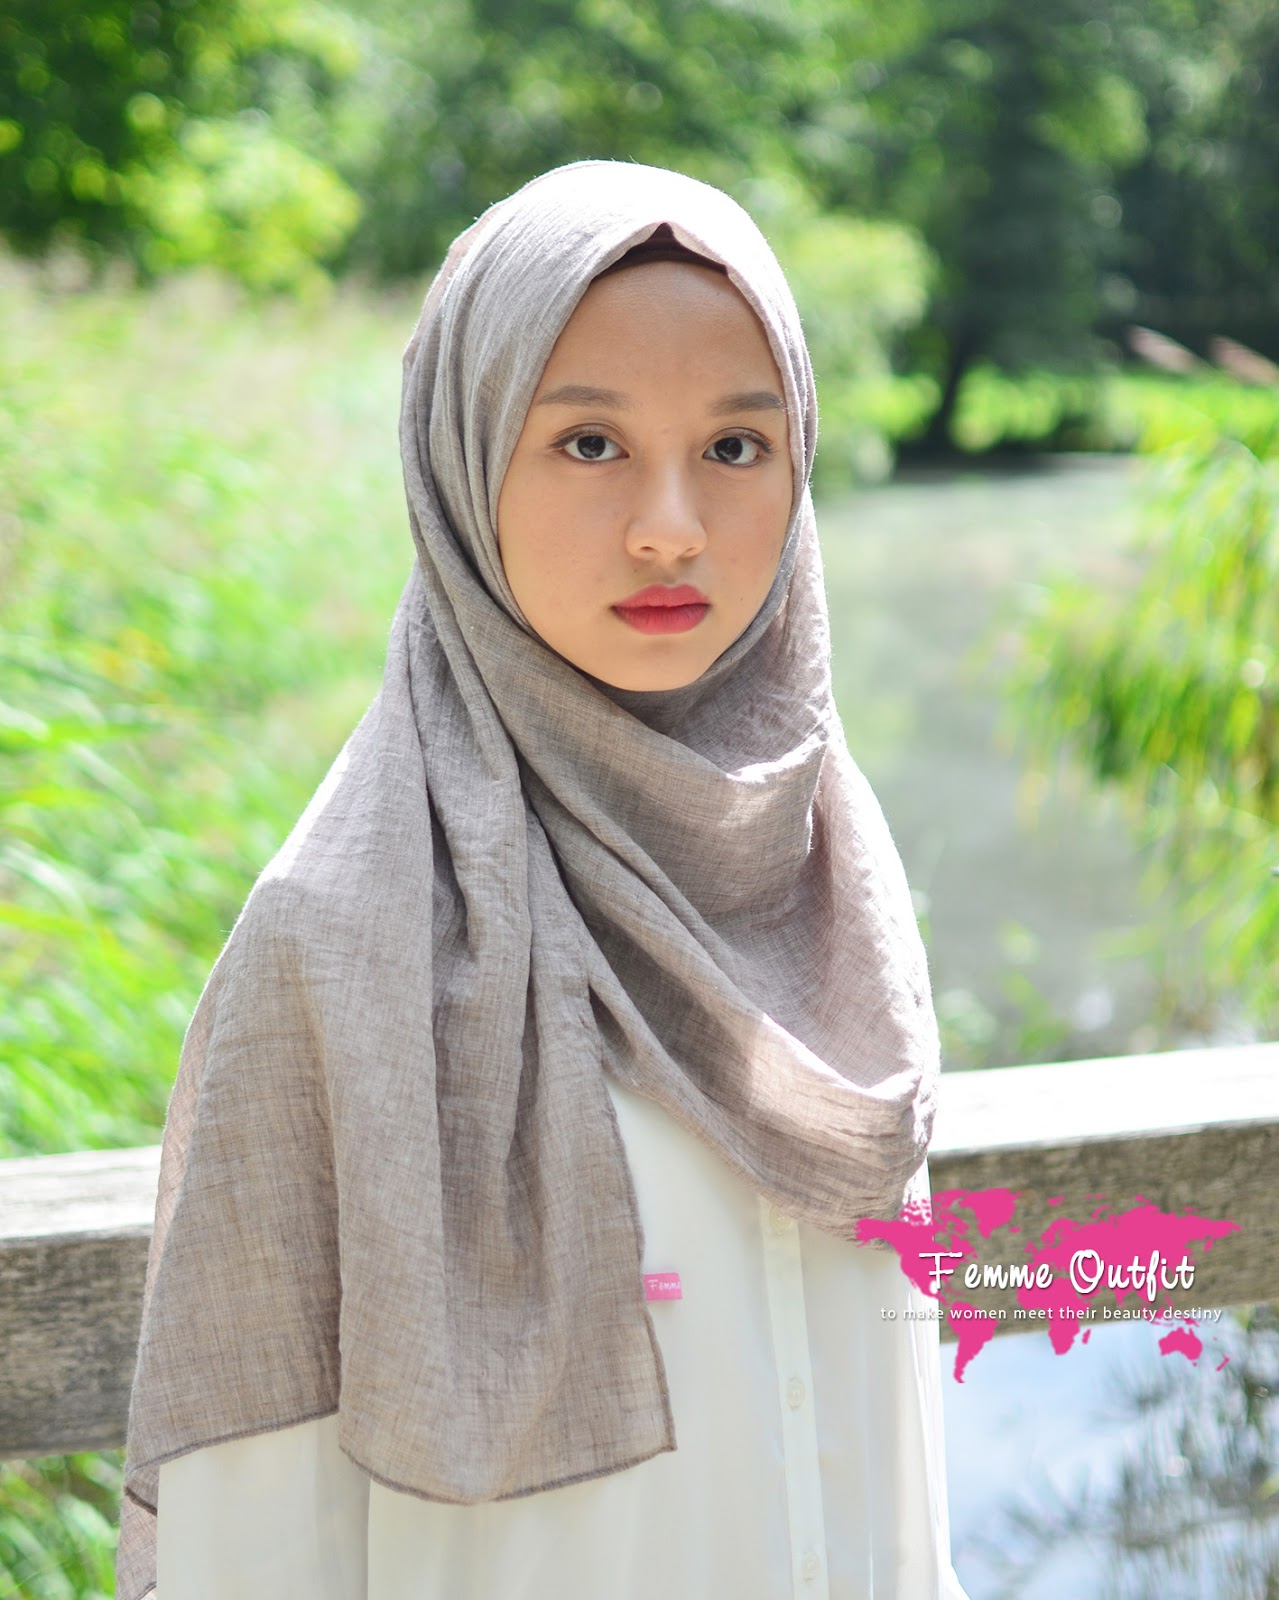 Femme Outfit Femme Outfit Tyrex Shawl New Colour